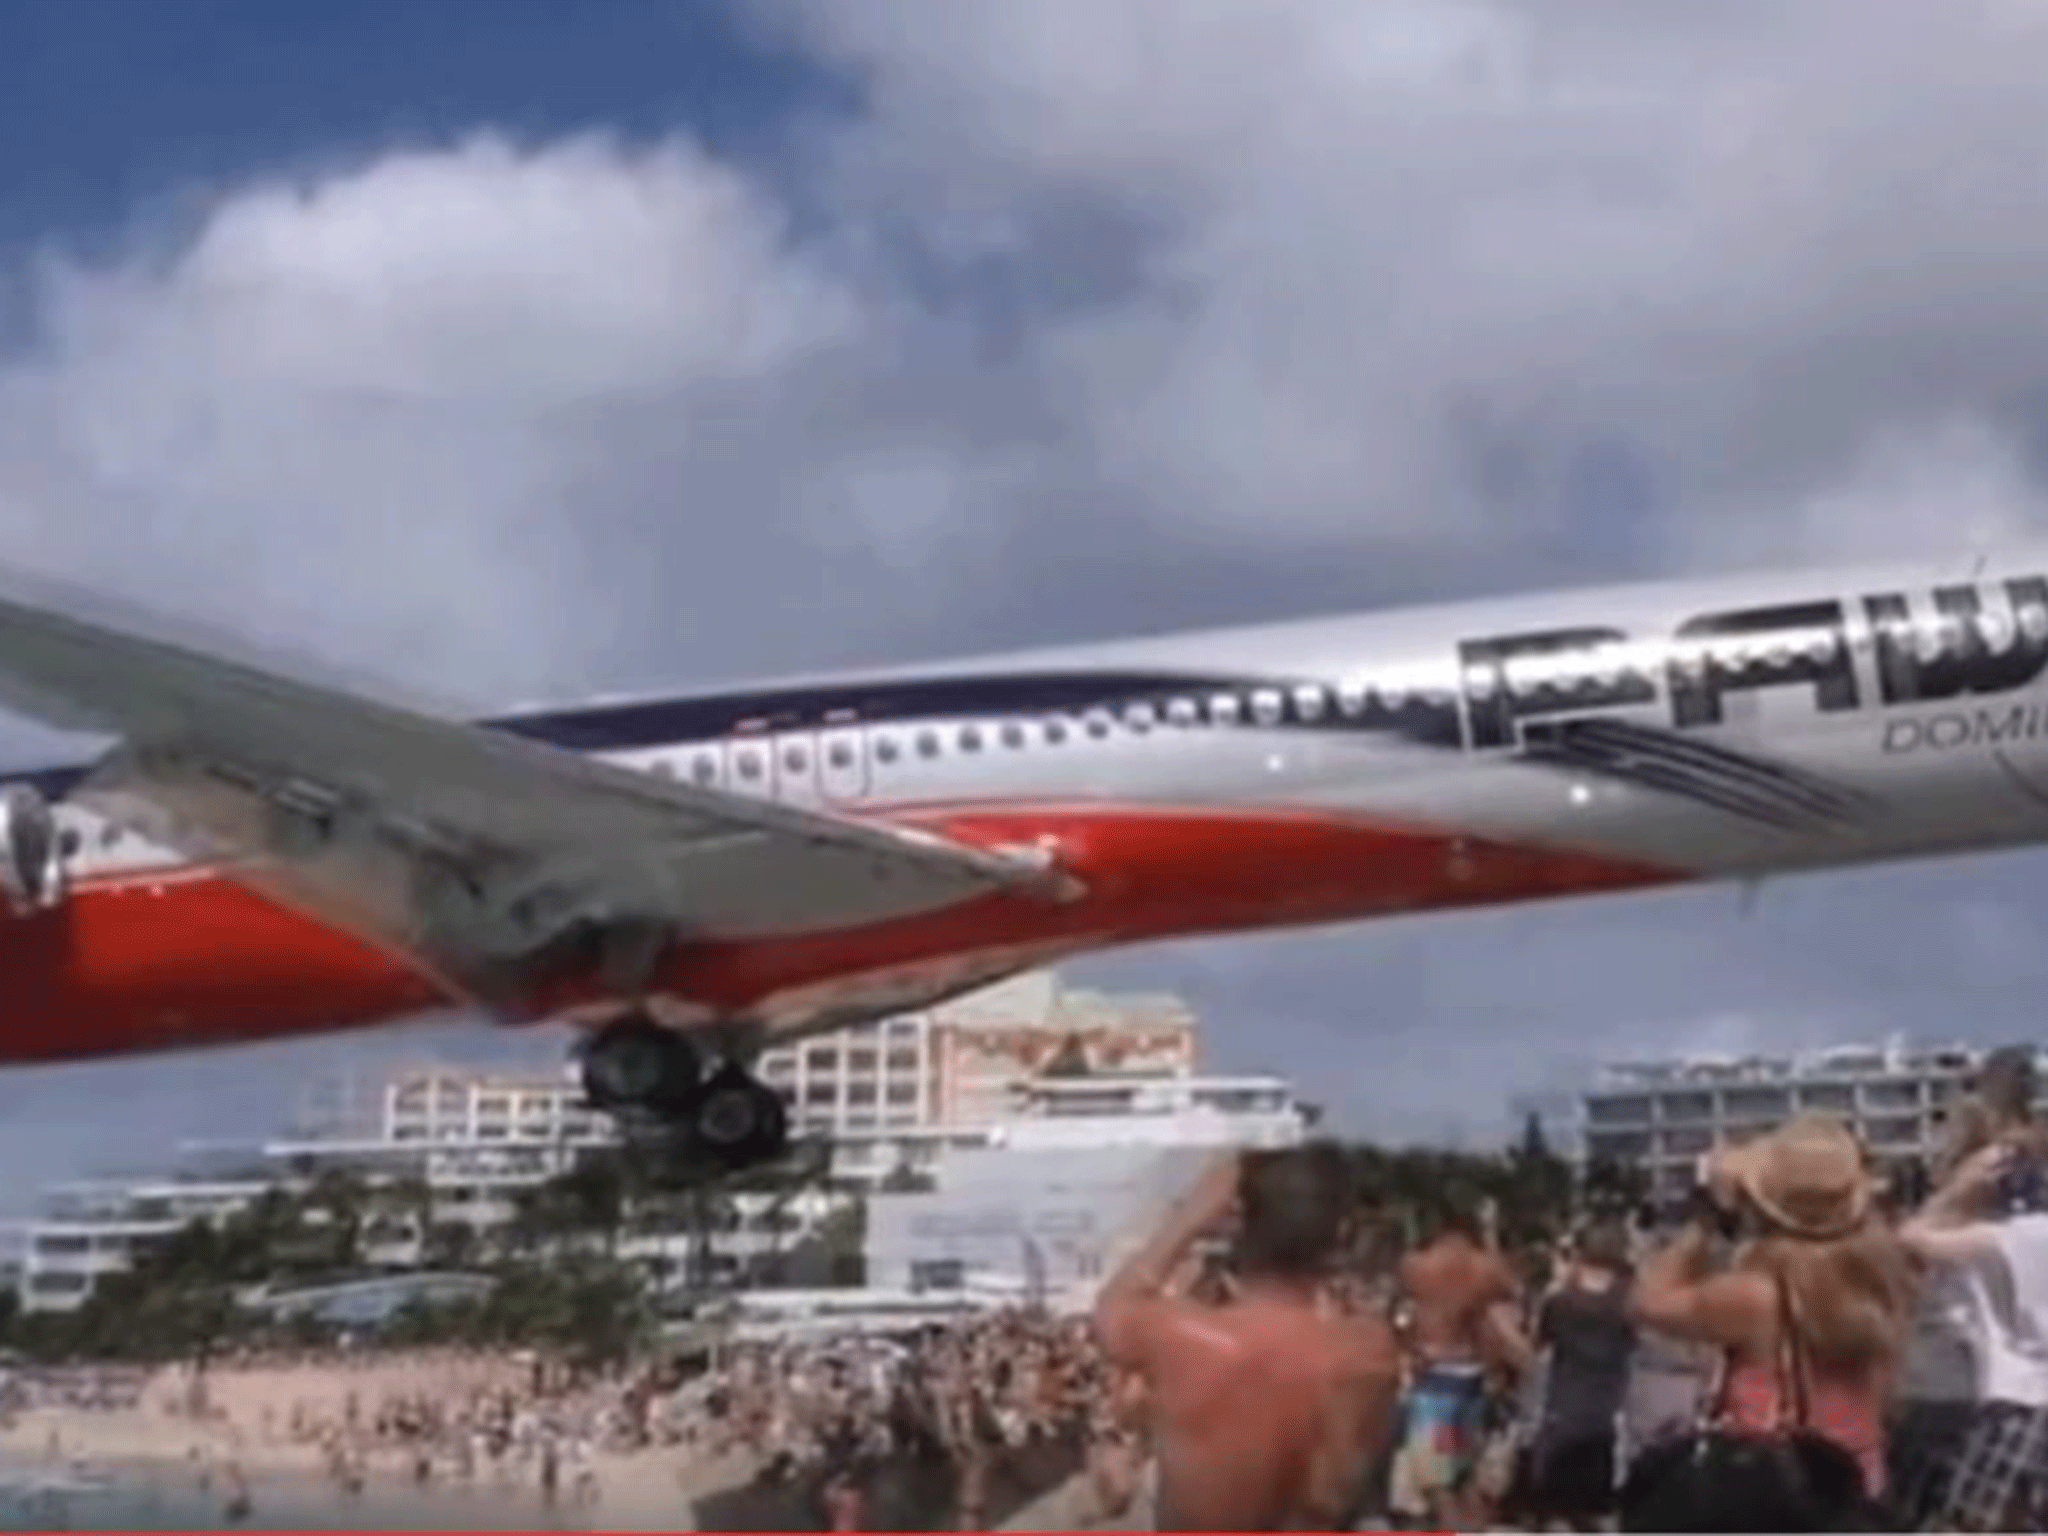 Maho beach is famous with plane enthusiasts for including one of the closest encounters with jets around